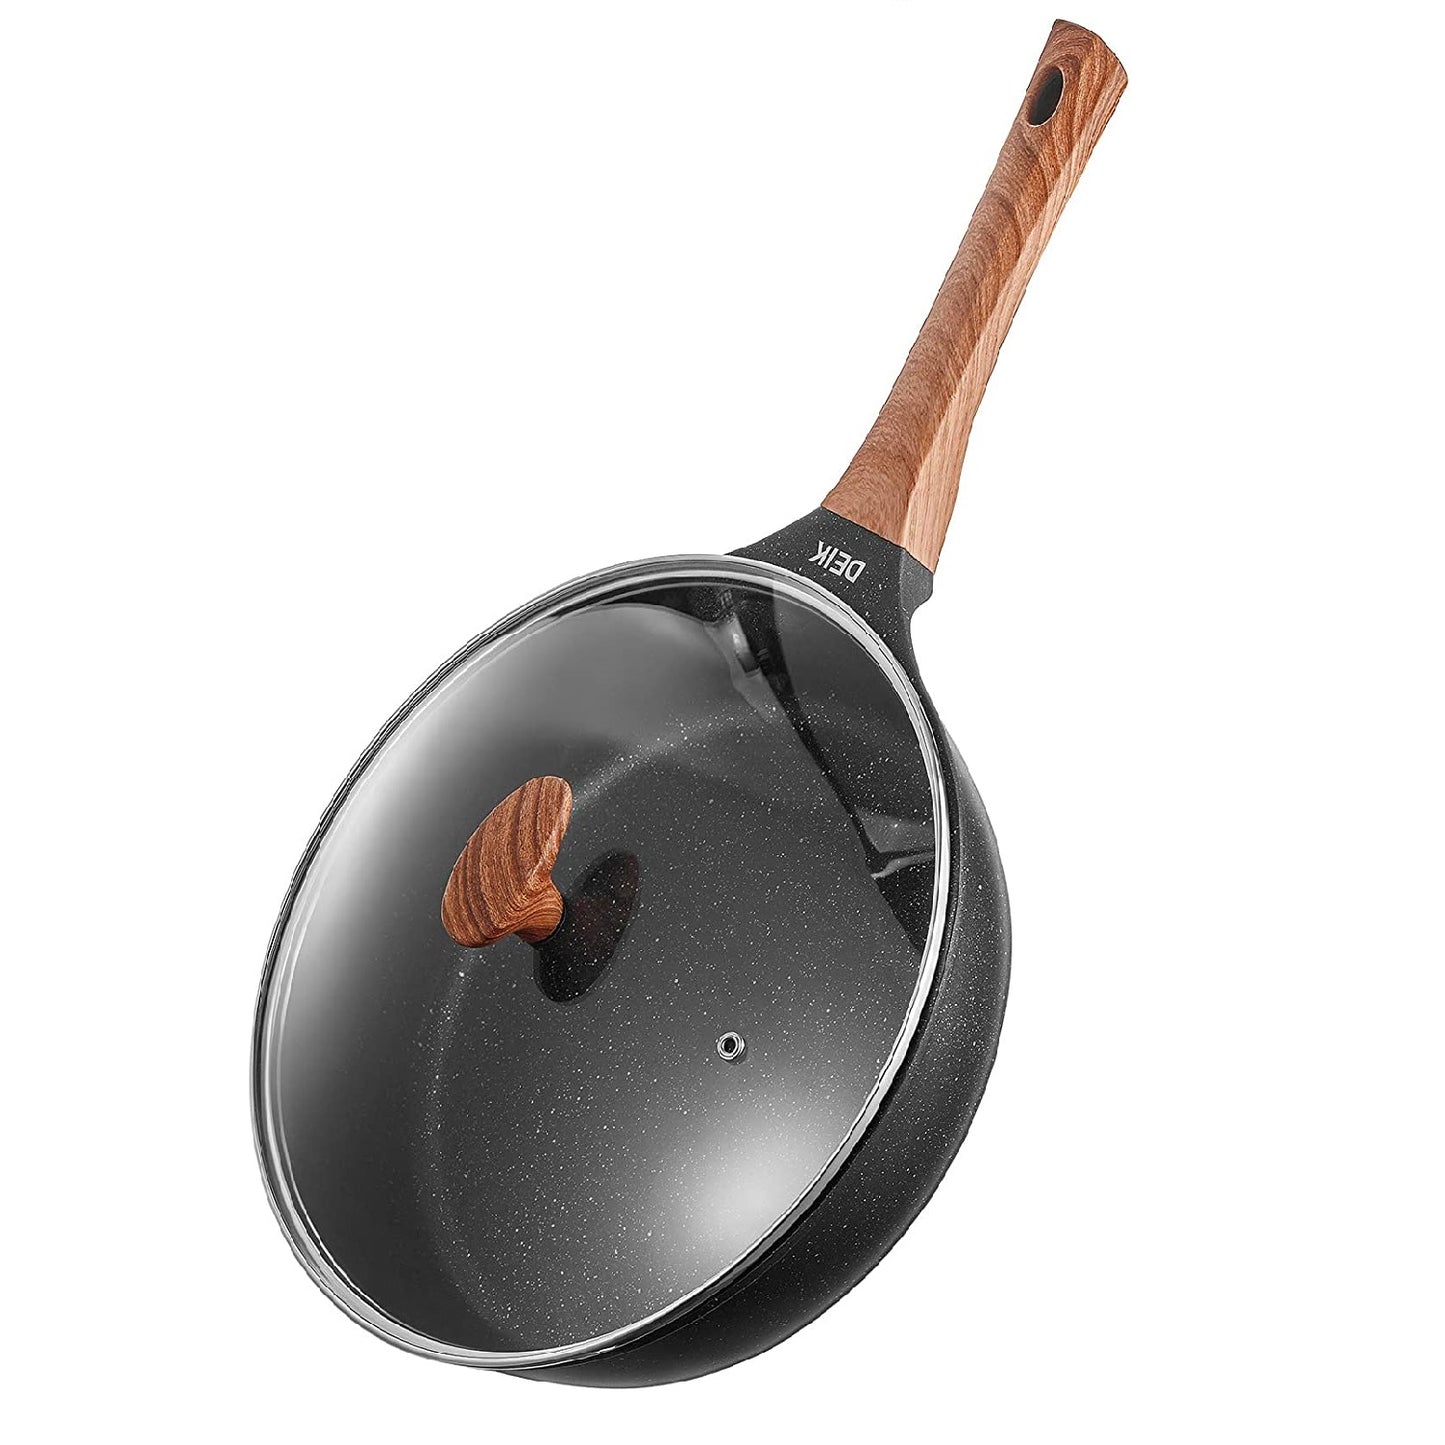 DEIK  Frying Pan with Lid, Non-Stick Frying Pan 28 cm, Saute Pan with Black Granite-Derived Coating, Die-cast Aluminium, Bakelite Handle, All Stoves Compatible